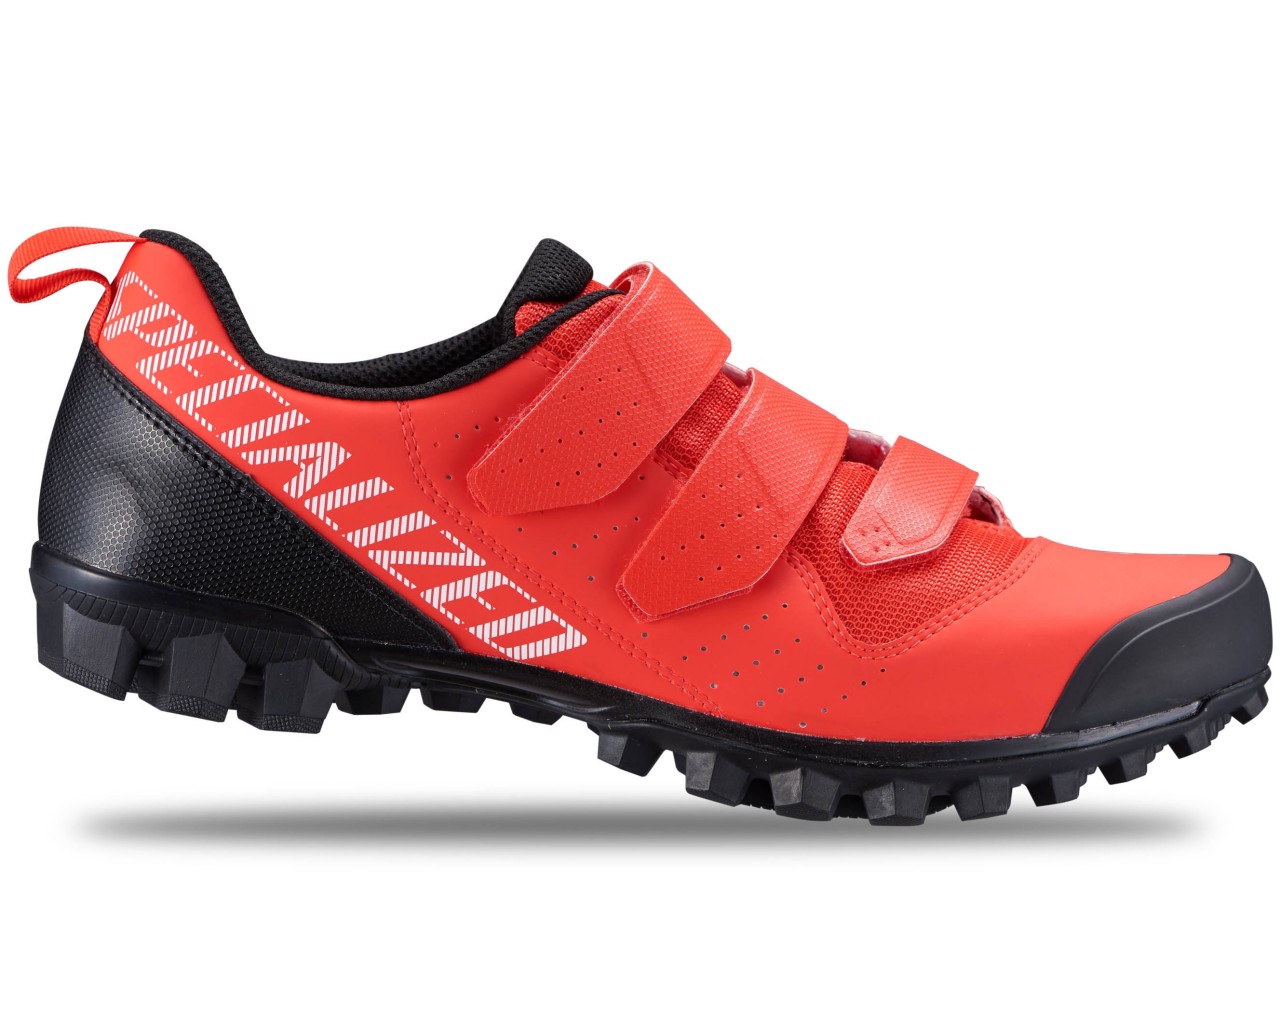 Specialized Recon 1.0 Mountain Bike Shoes | rocket red